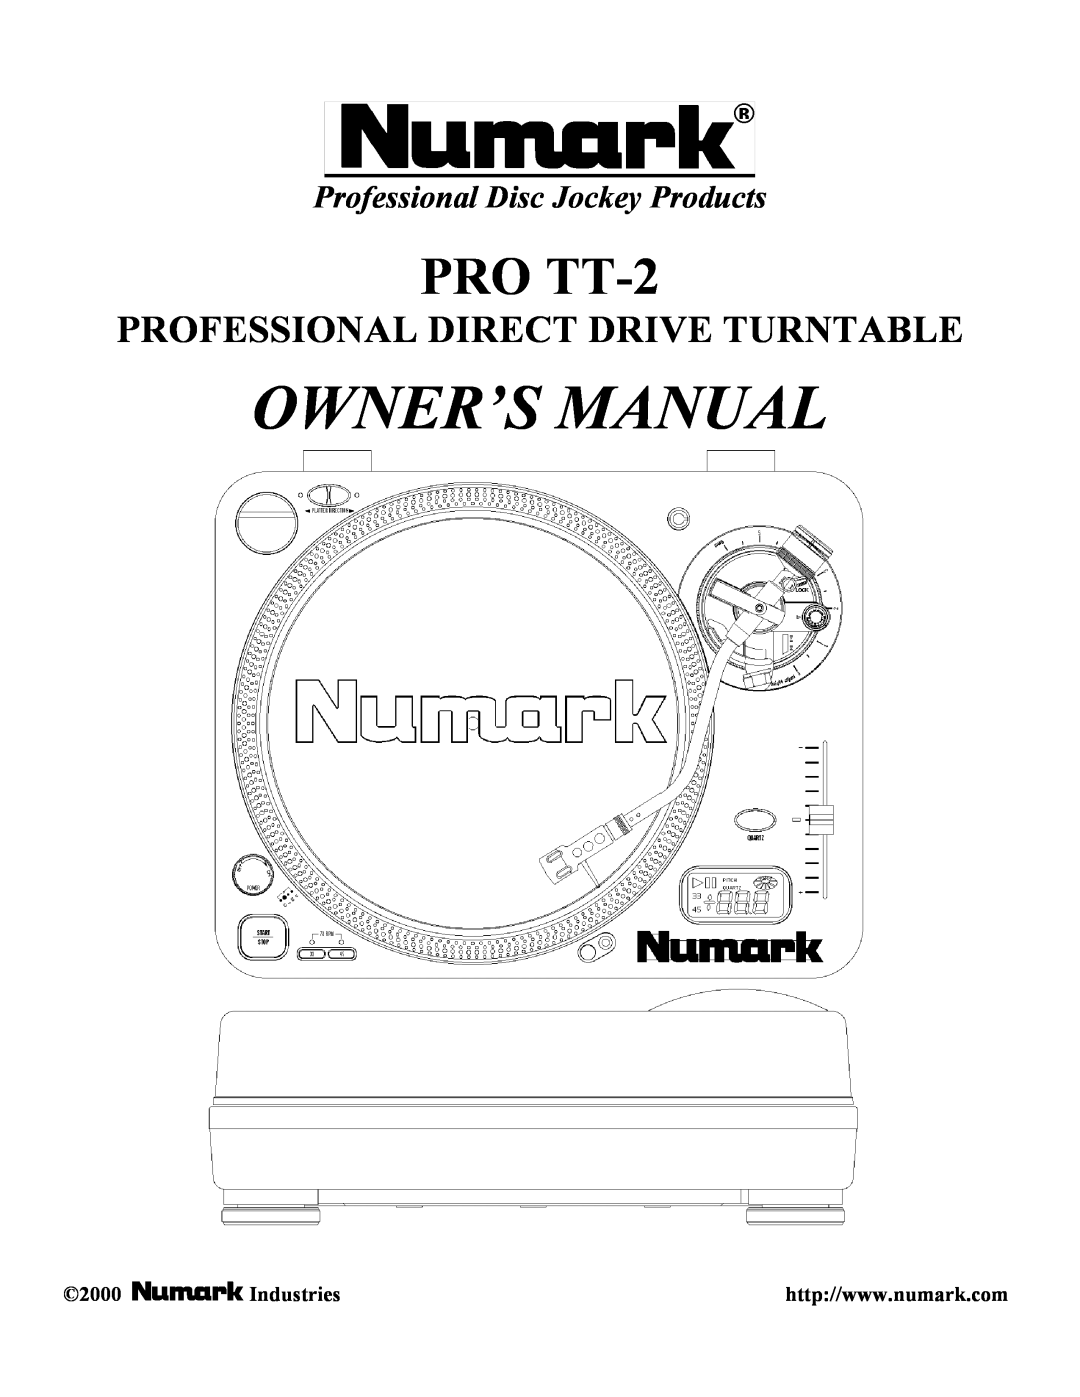 Numark Industries PRO TT-2 owner manual Professional Disc Jockey Products, Professional Direct Drive Turntable 